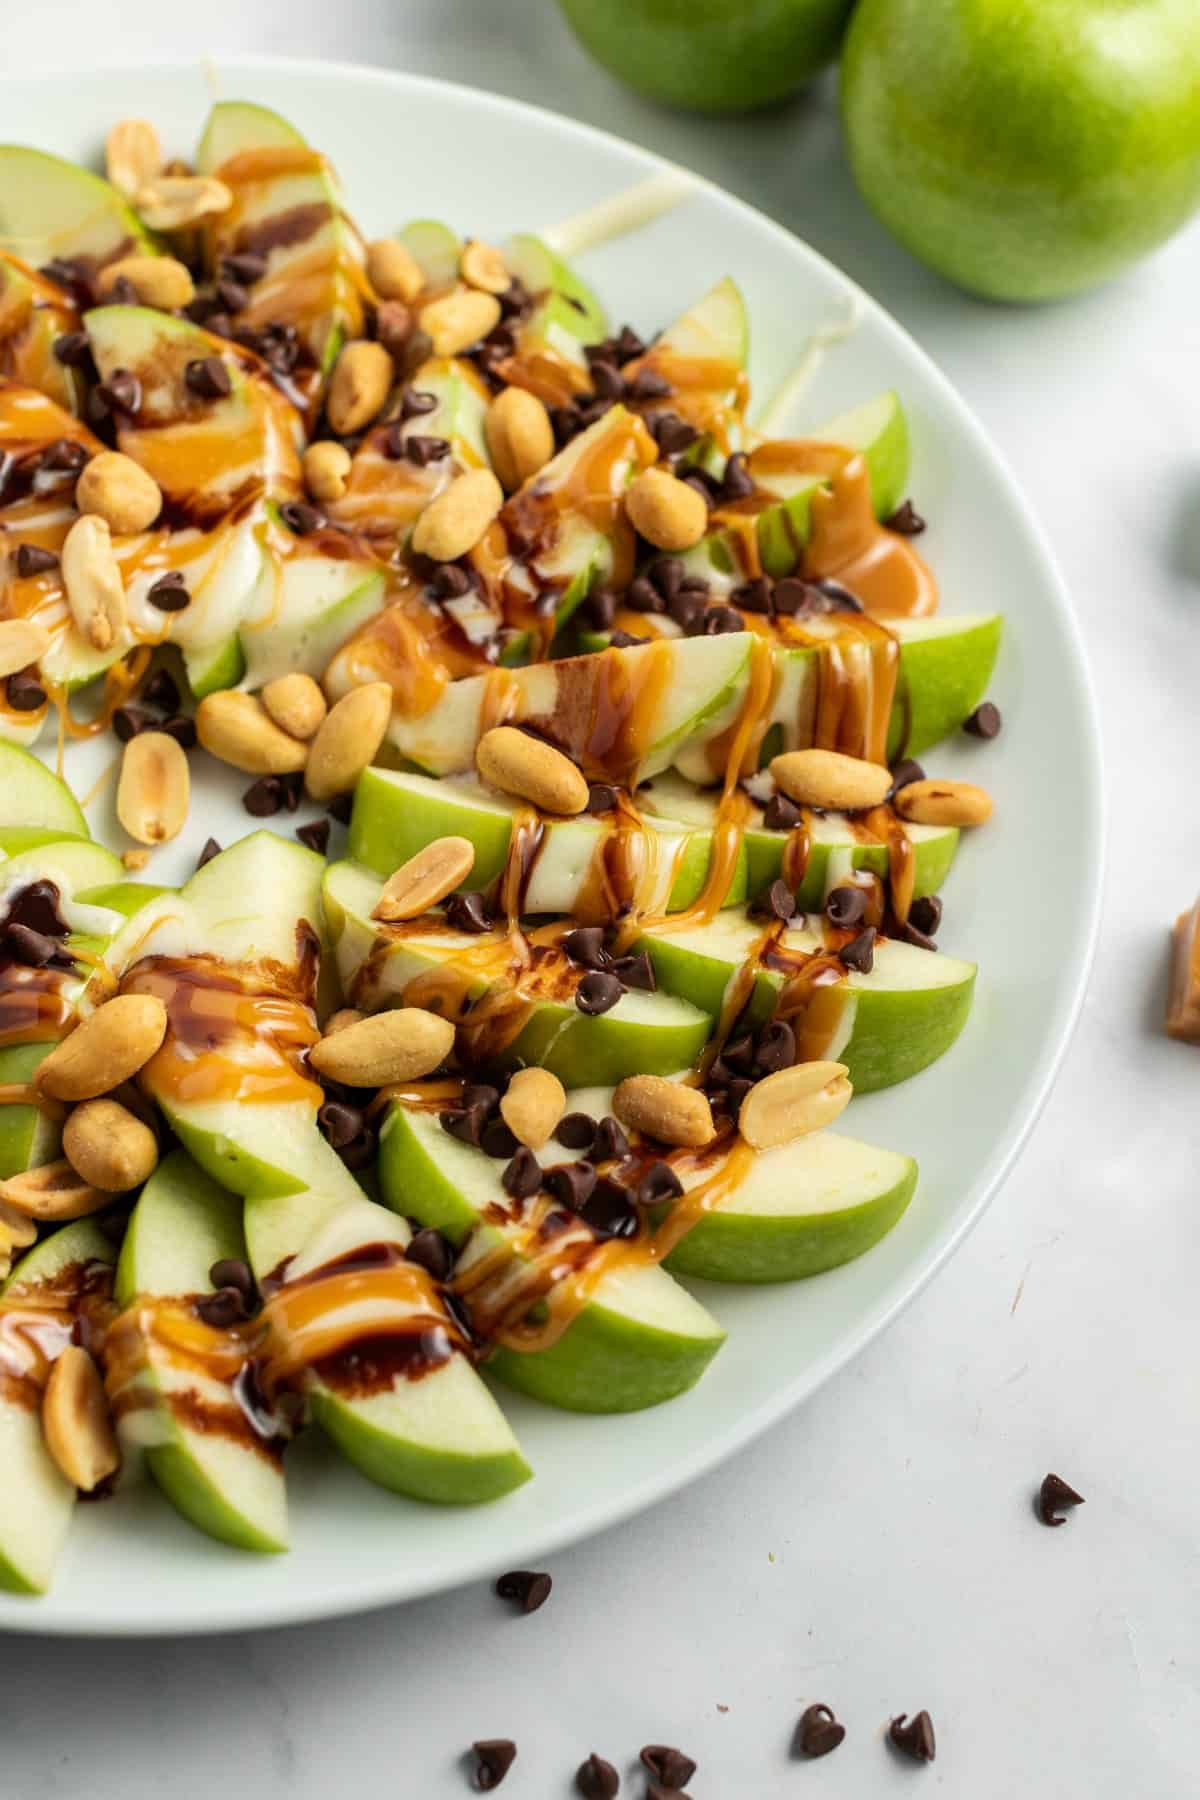 Apple nachos on a plate with green apple slices, caramel, chocolate, and melted marshmallow.